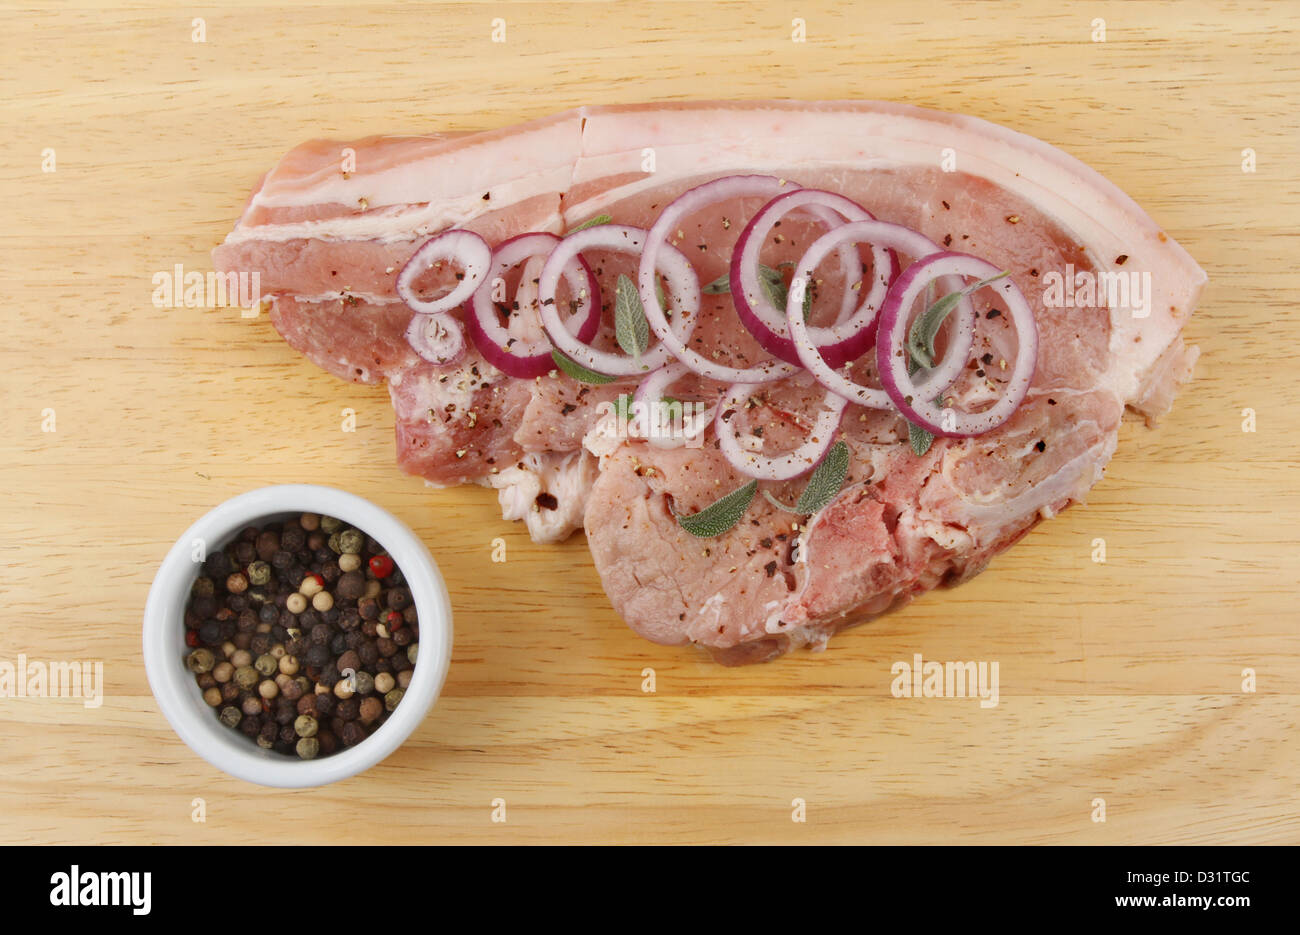 Pork chop dressed with red onion sage and pepper with mixed peppercorns in a ramekin on a wooden board Stock Photo